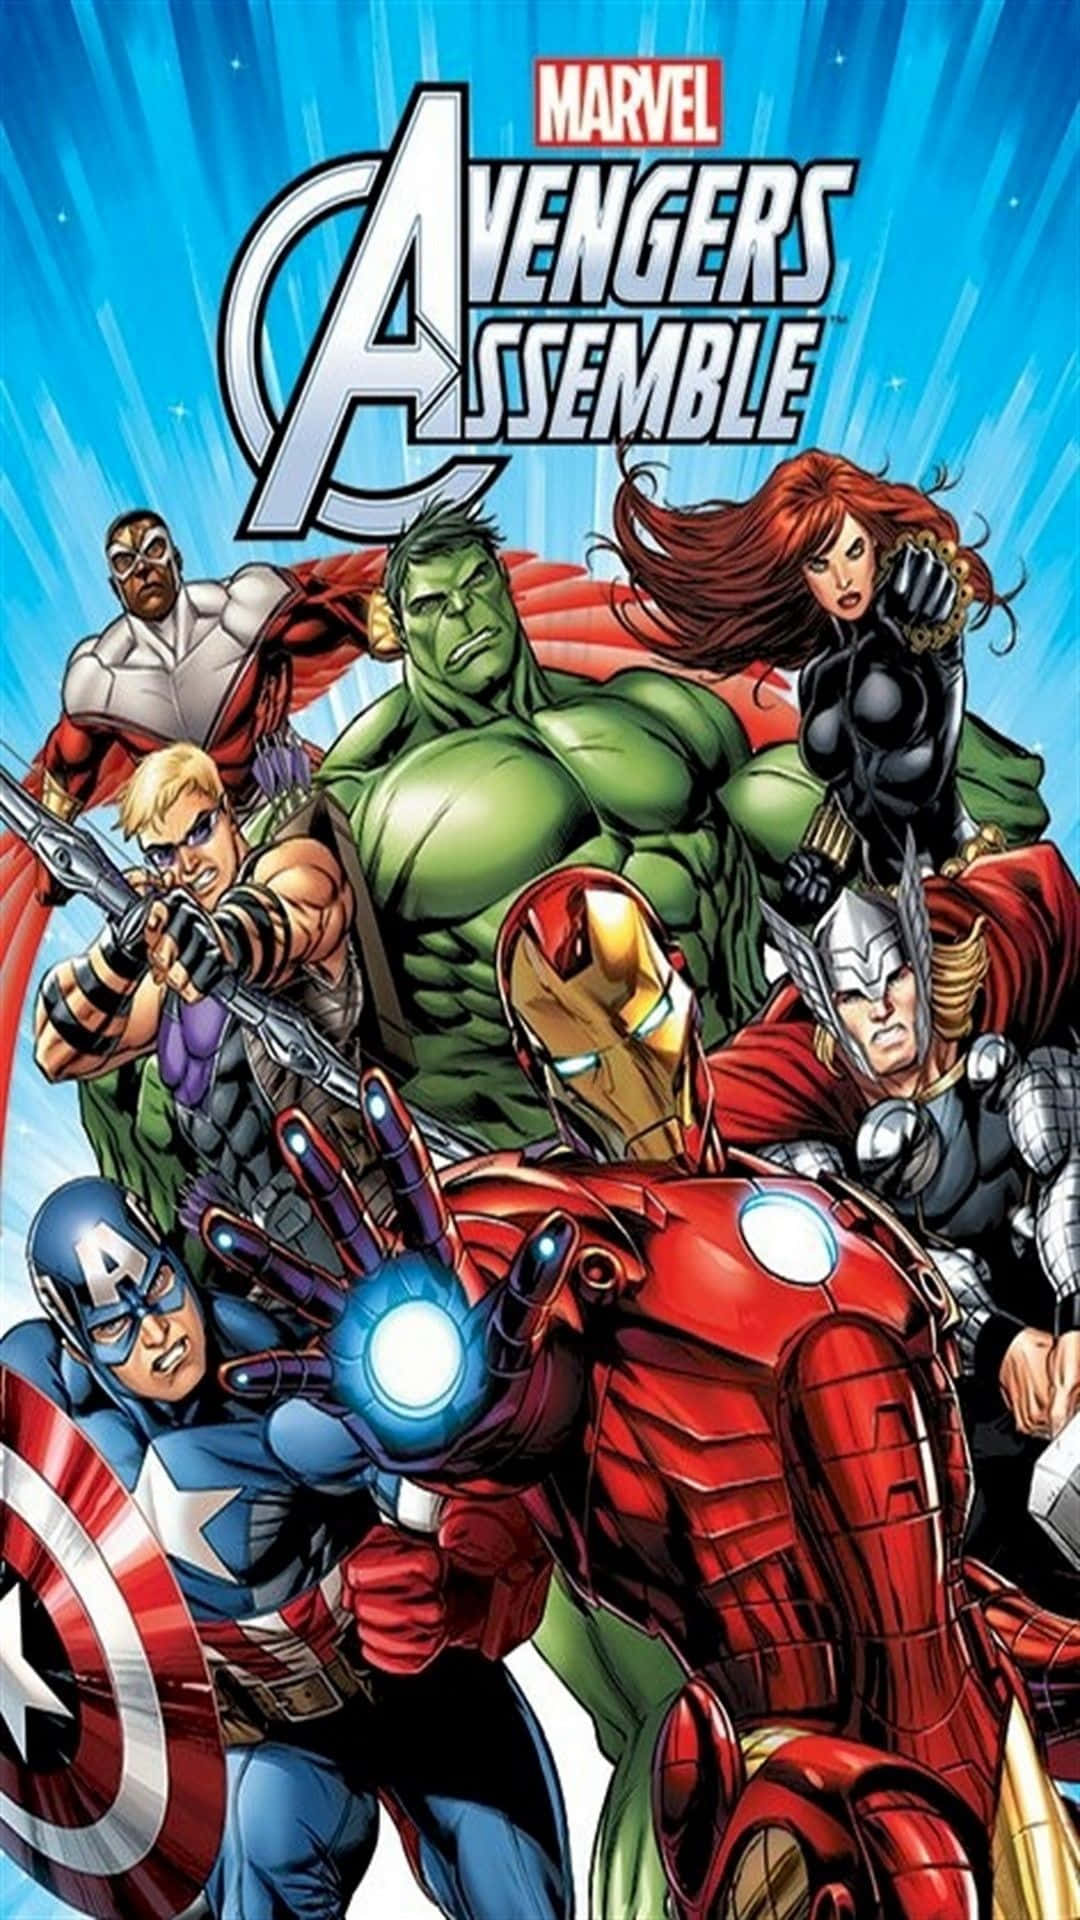 The Earth's Mightiest Heroes - united to fight evil! Wallpaper